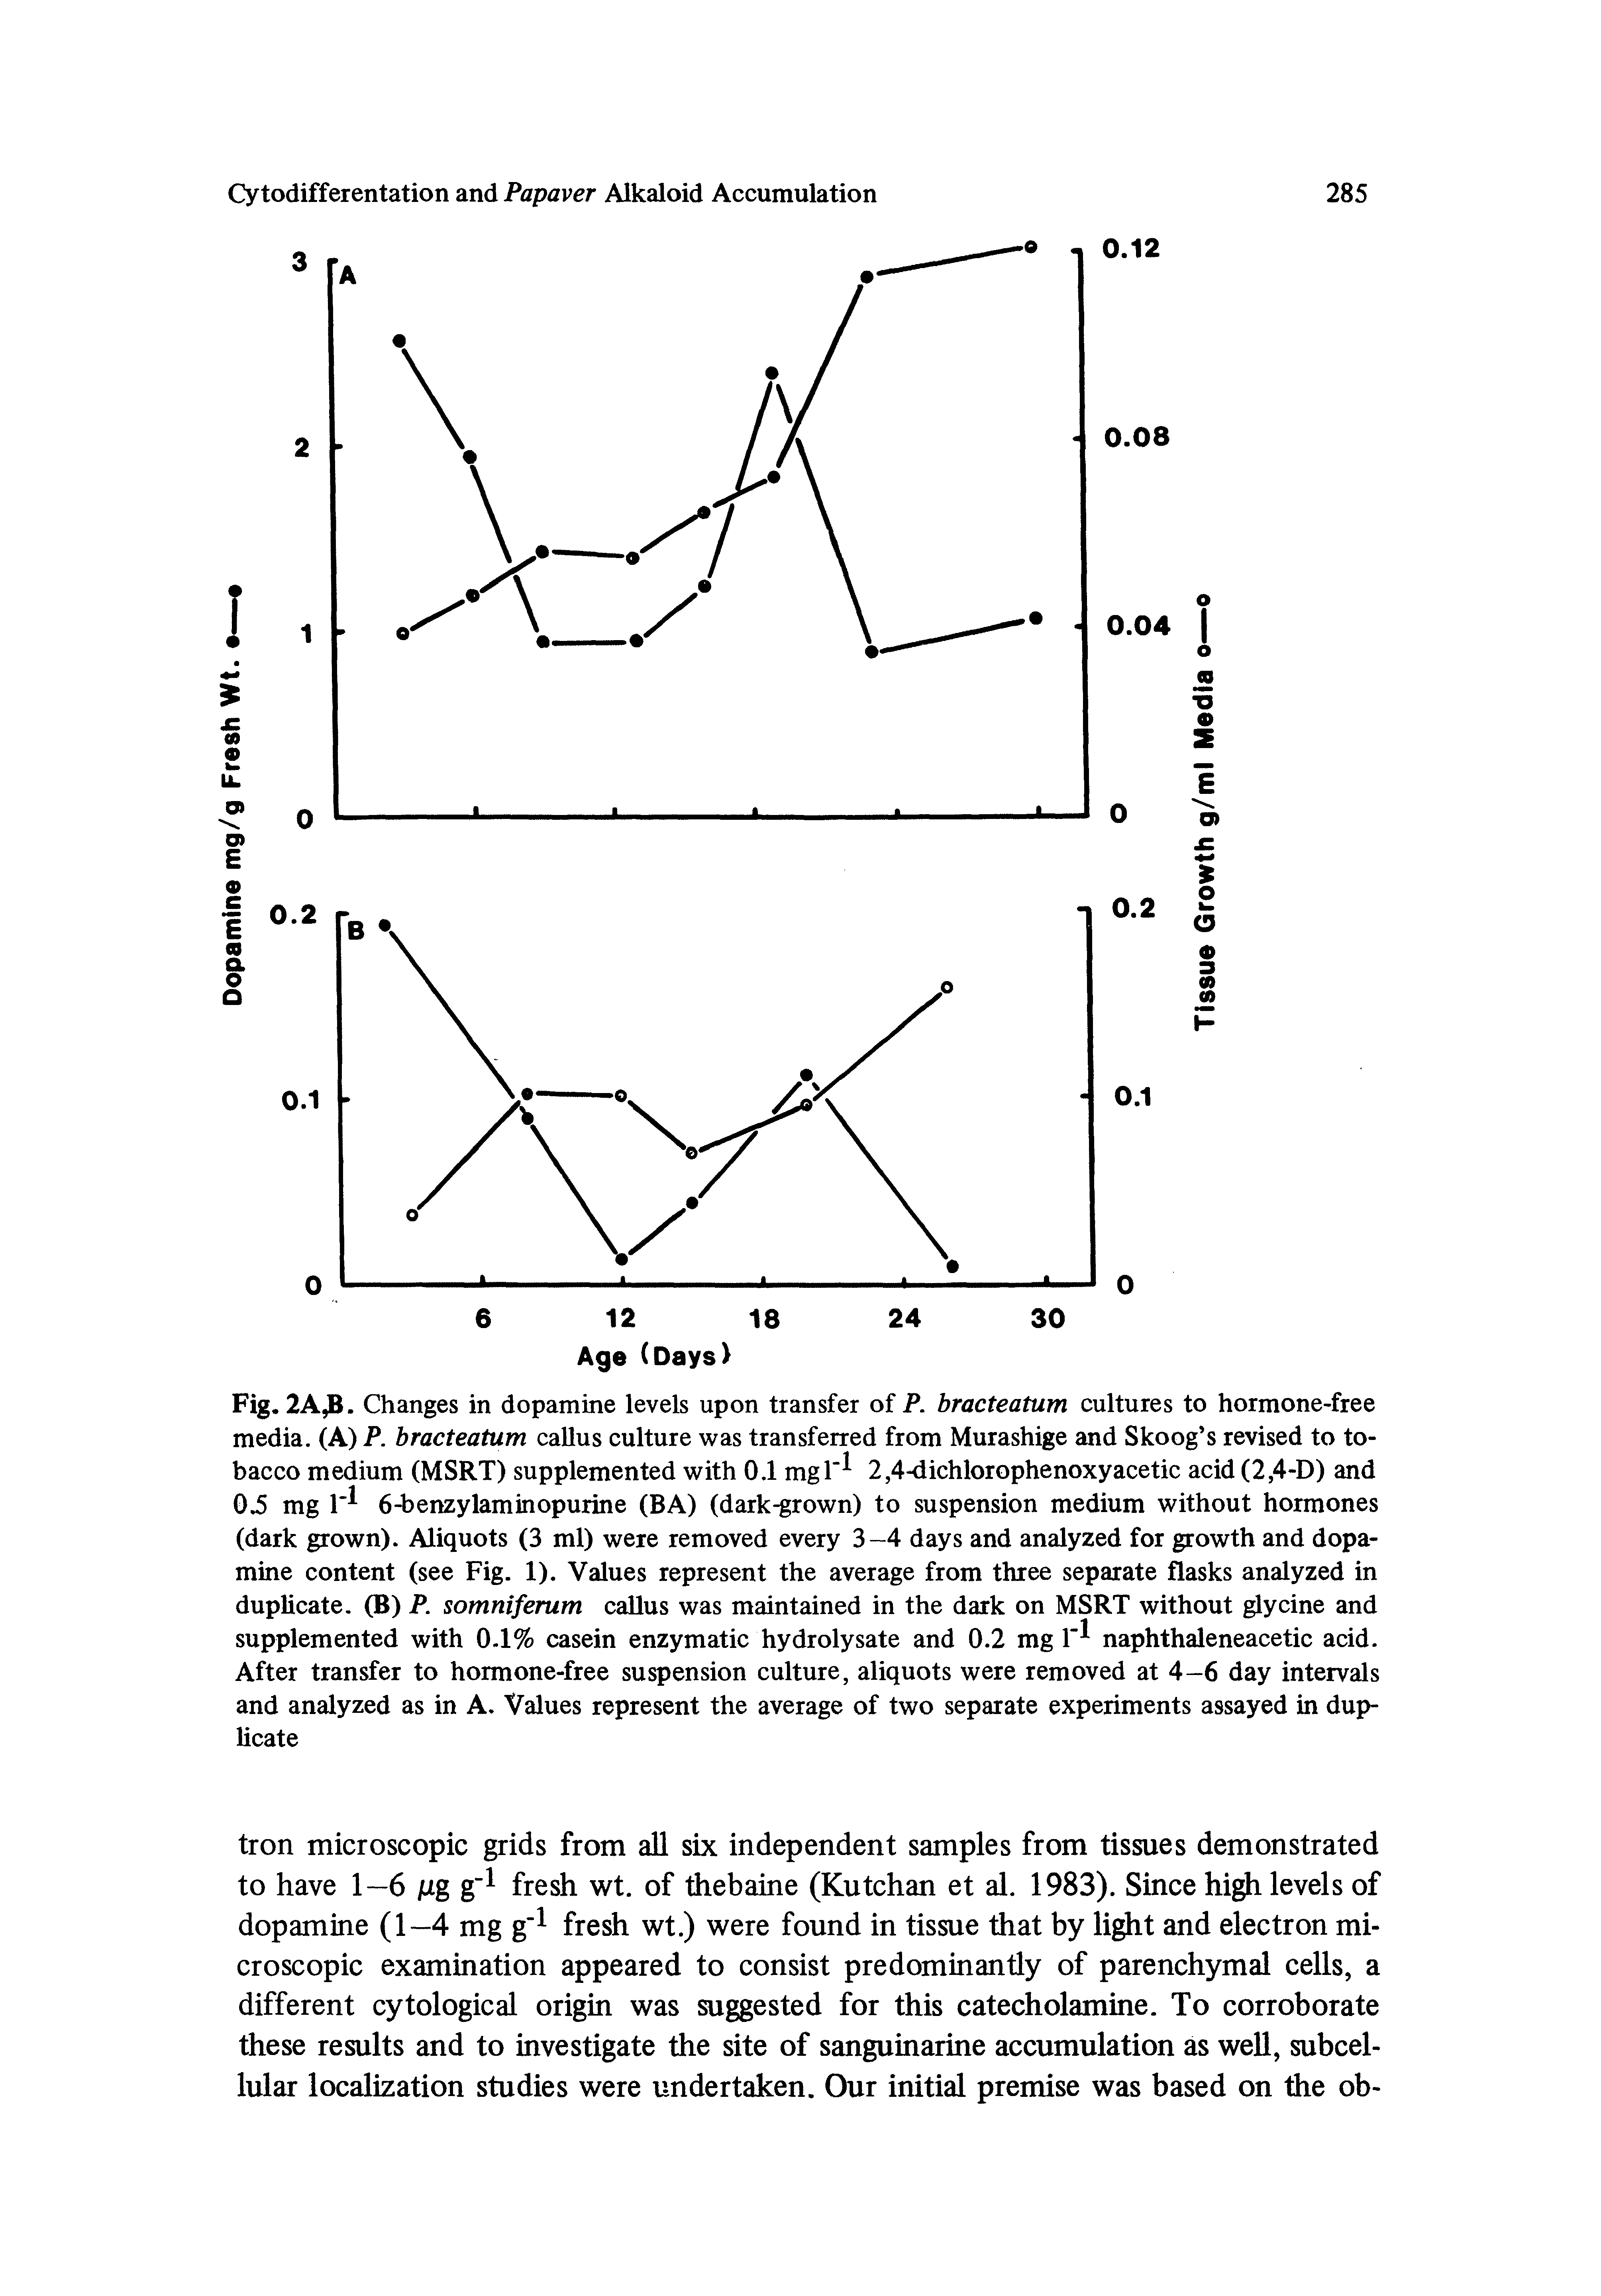 Fig. 2A. Changes in dopamine levels upon transfer of P. bracteatum cultures to hormone-free media. (A) P. bracteatum callus culture was transferred from Murashige and Skoog s revised to tobacco medium (MSRT) supplemented with 0.1 mgl 2,4-dichlorophenoxyacetic acid (2,4-D) and 0.5 mg 6-benzylaminopurine (BA) (dark-grown) to suspension medium without hormones (dark grown). Aliquots (3 ml) were removed every 3-4 days and analyzed for growth and dopamine content (see Fig. 1). Values represent the average from three separate flasks analyzed in duplicate. (B) P. somniferum caUus was maintained in the dark on MSRT without glycine and supplemented with 0-1% casein enzymatic hydrolysate and 0.2 mg naphthaleneacetic acid. After transfer to hormone-free suspension culture, aliquots were removed at 4-6 day intervals and analyzed as in A. Values represent the average of two separate experiments assayed in duplicate...